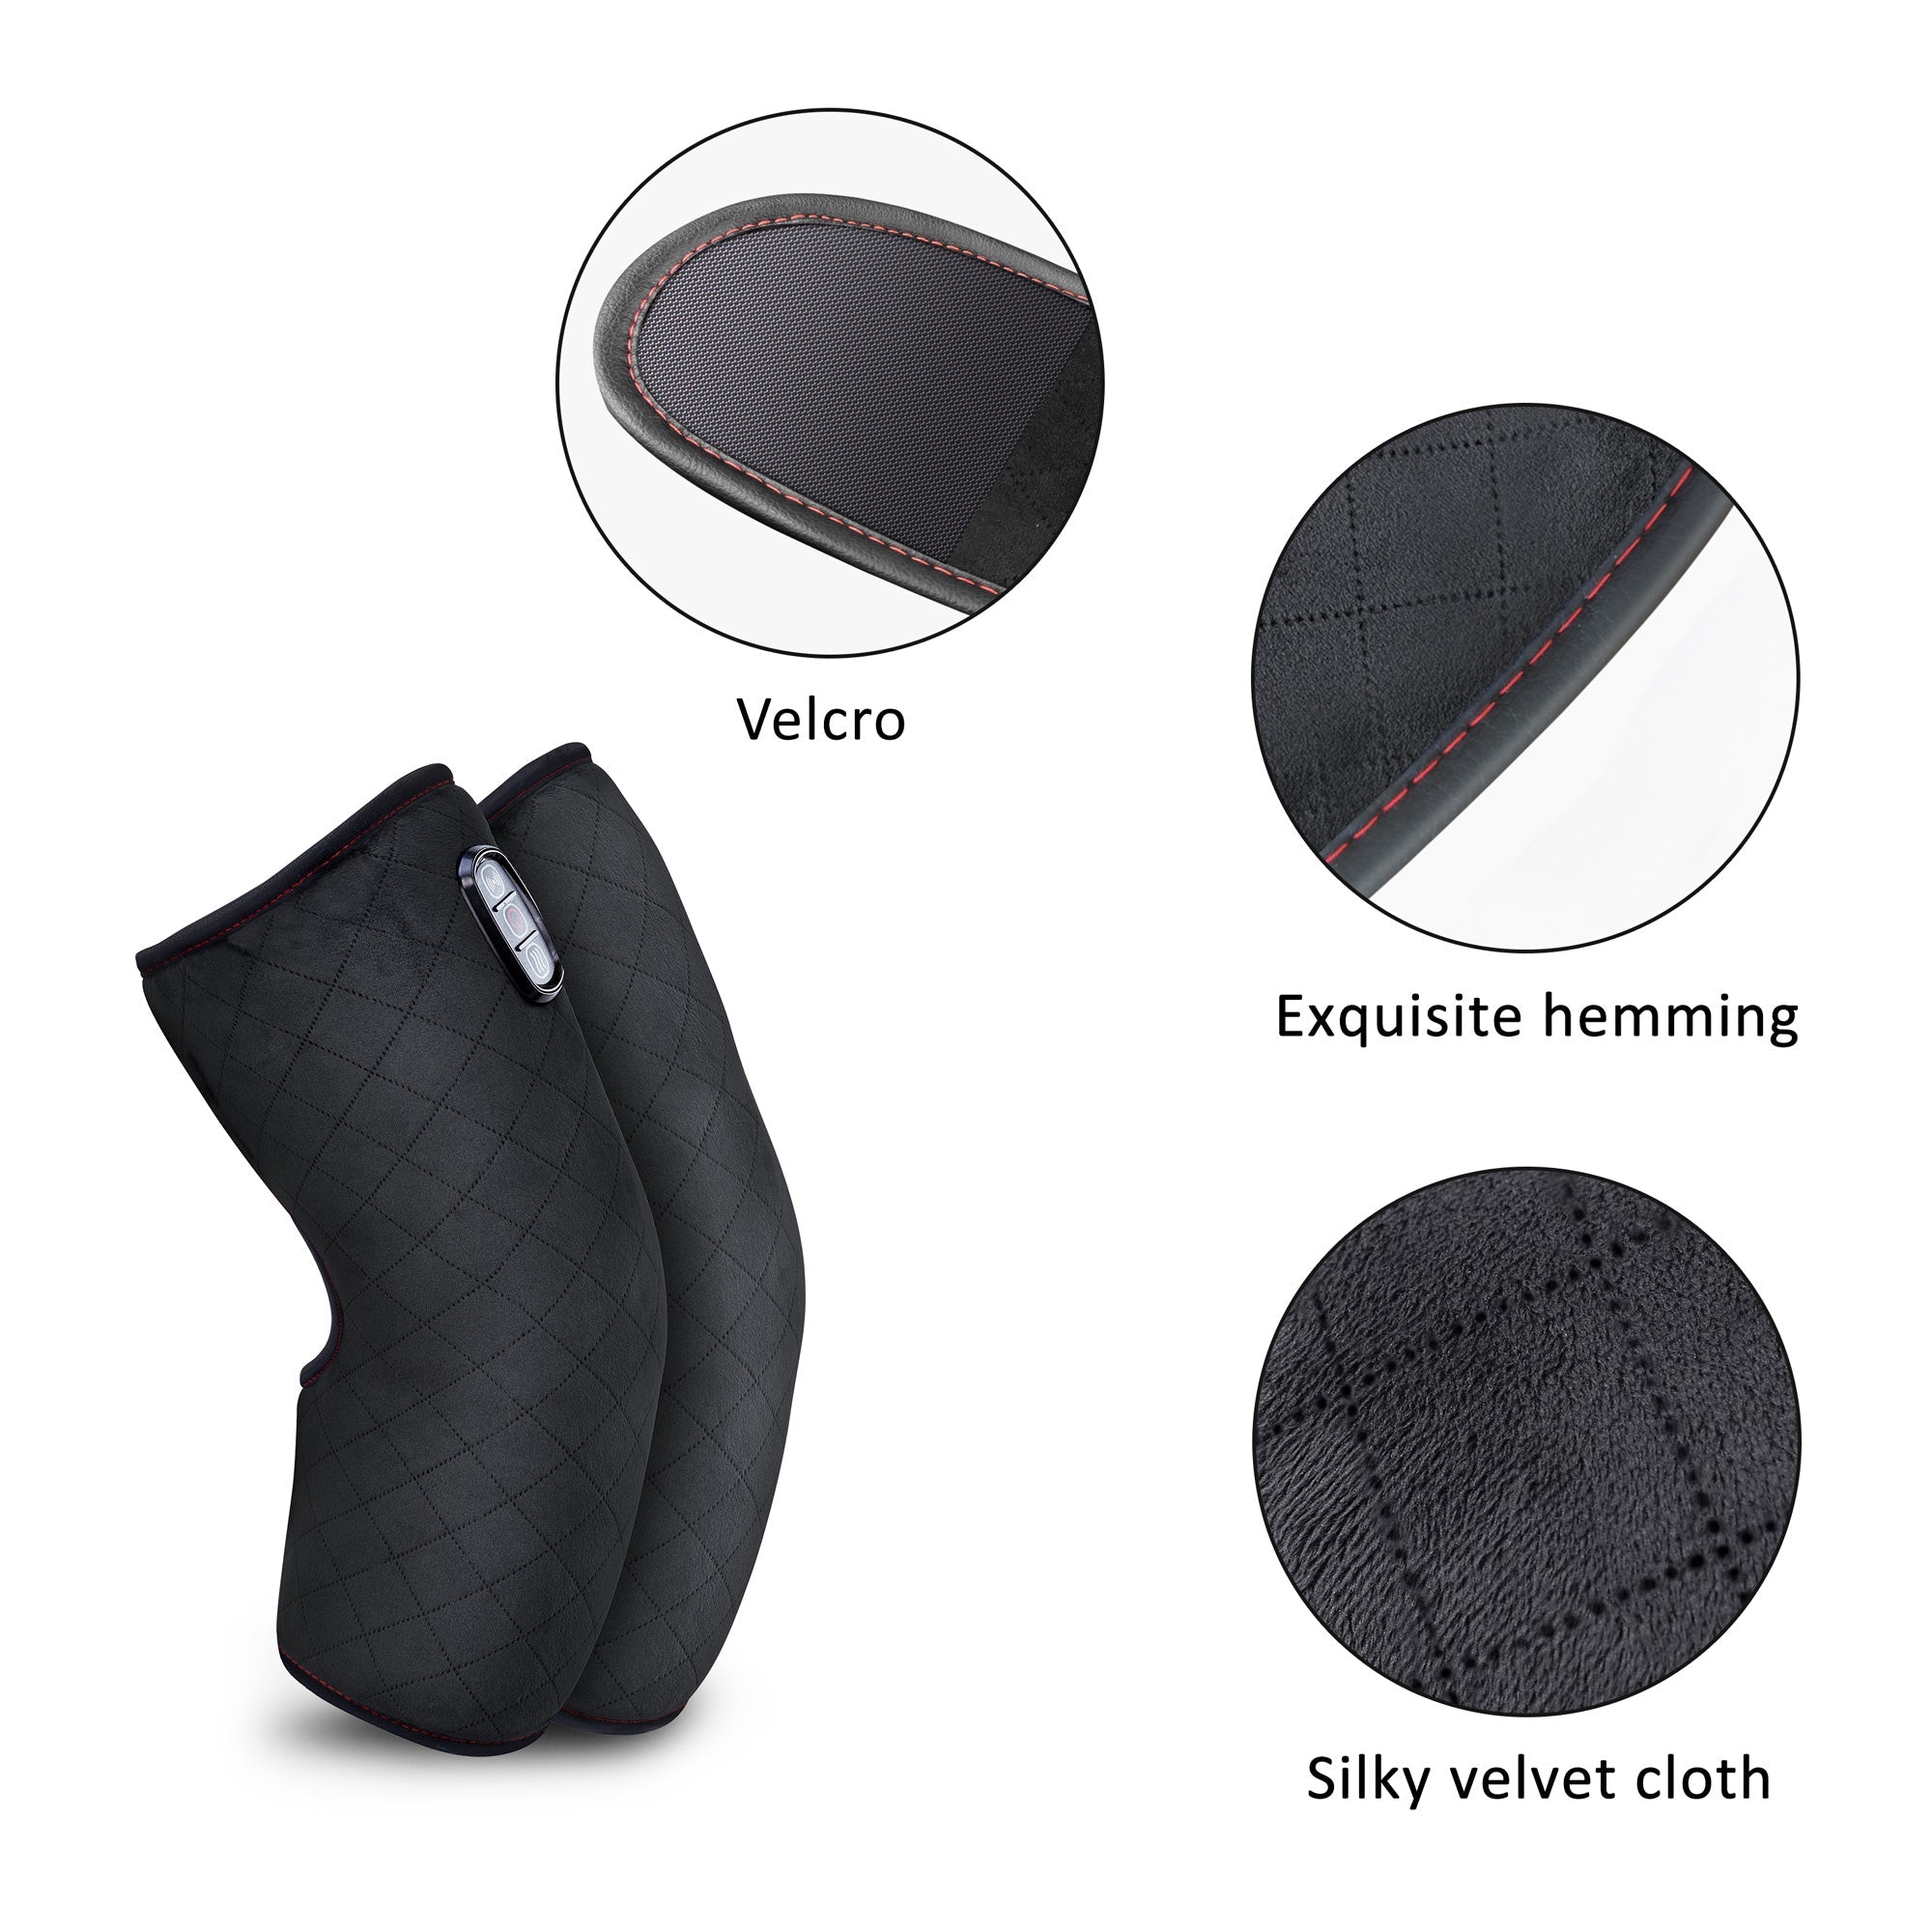 Certified Refurbished - Comfier Heated Knee Brace Wrap with Massage,Vibration Knee Massager with Heat - 5701-USED